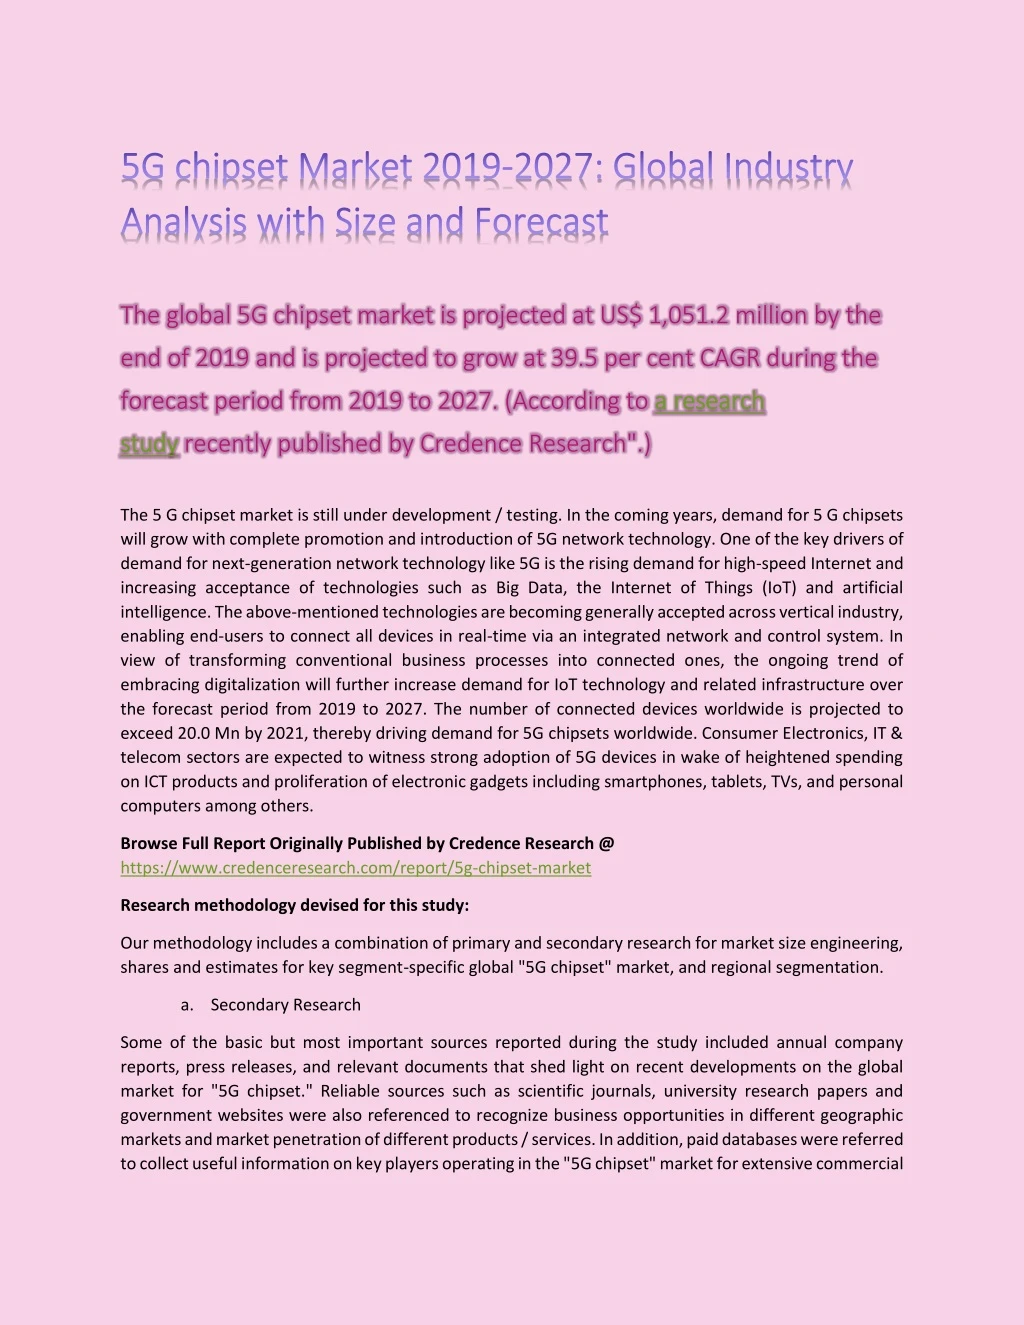 the global 5g chipset market is projected